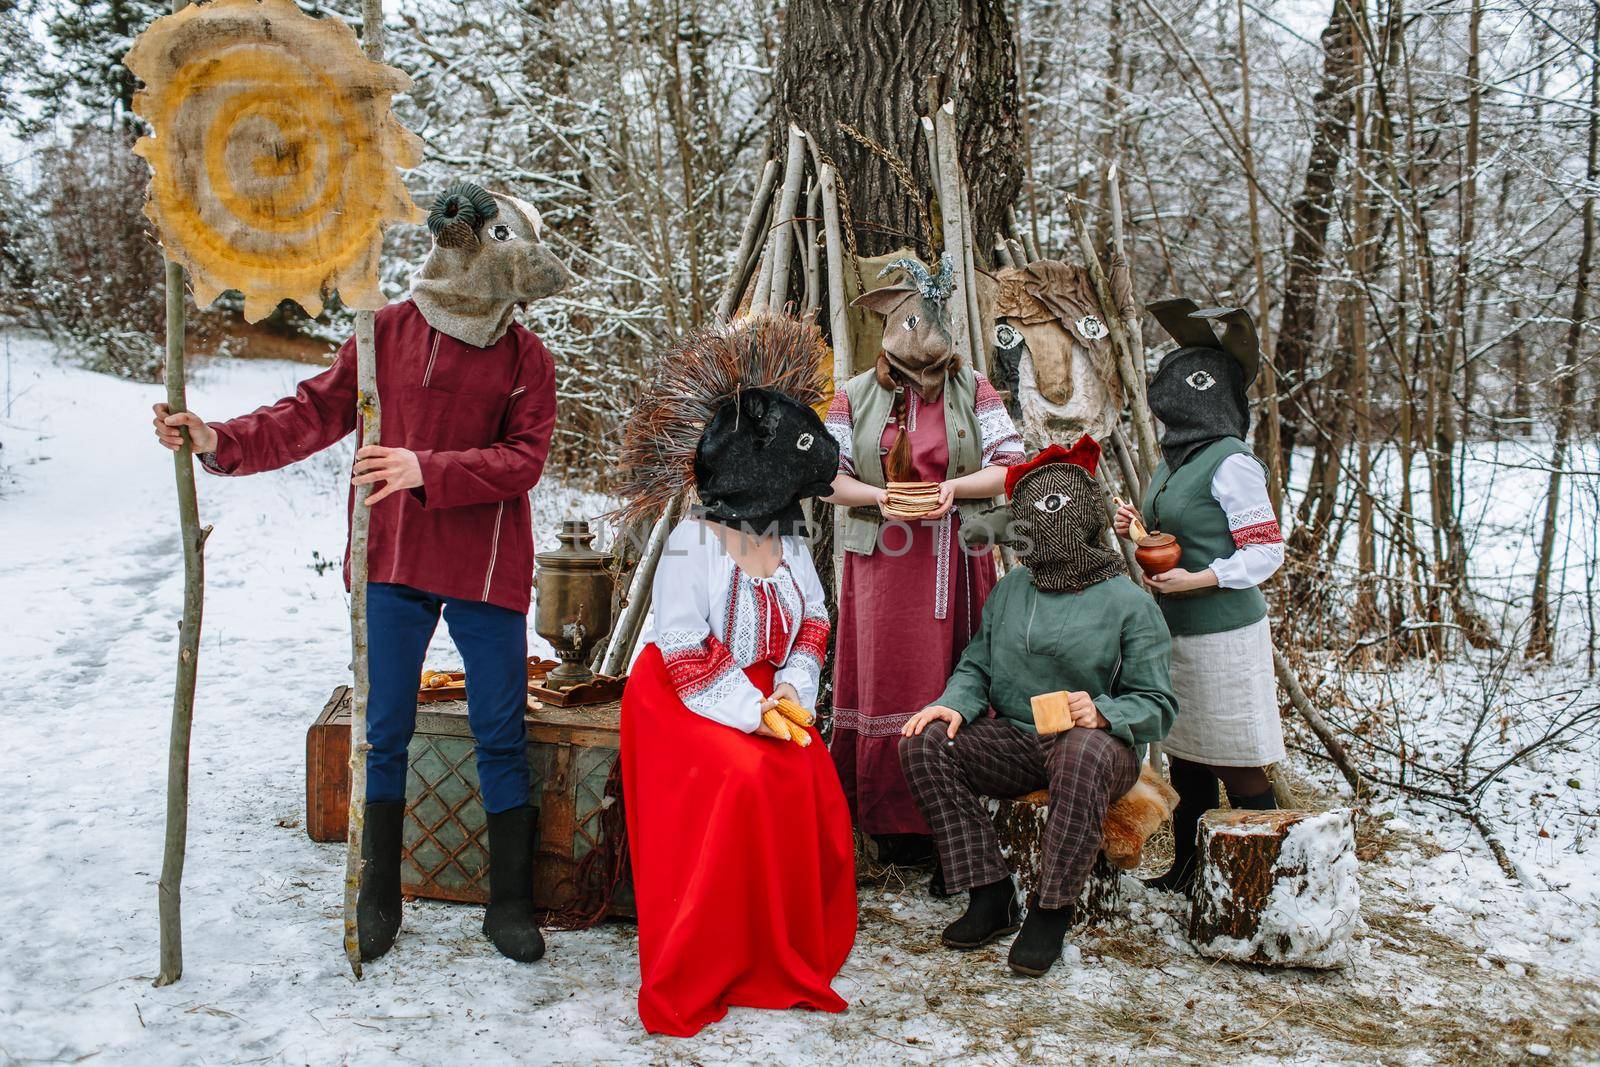 People in national costumes with animal heads celebrate the arrival of the pagan holiday Maslenitsa.